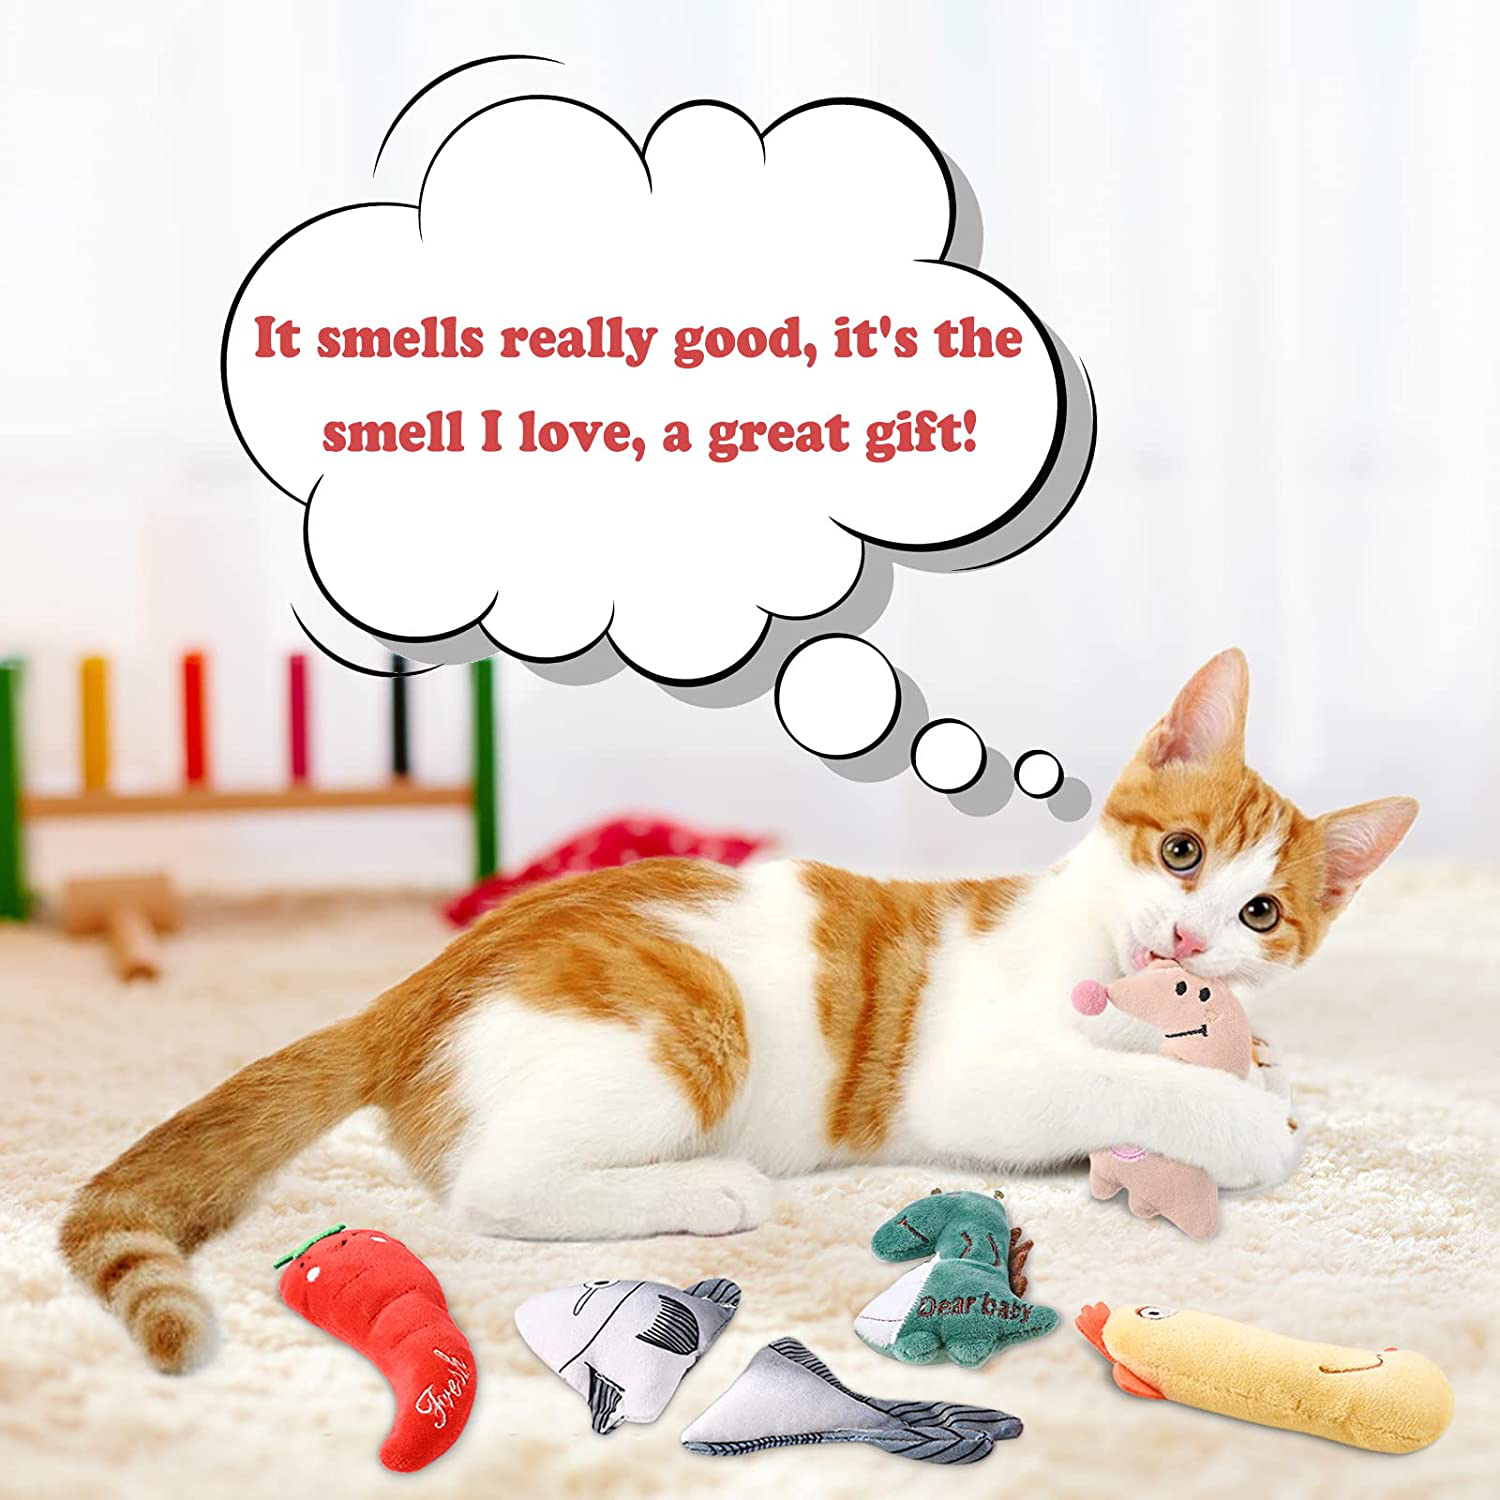 Guzack Catnip Toys 6Pcs, Cat Toys for Indoor Cats, Cat Teething Chew Toy Bite Resistant Catnip Toys, Catnip Filled Cat Pillow Toys Kitten Toy Set, Small Cute Plush Pet Kitty Interactive Cat Toys